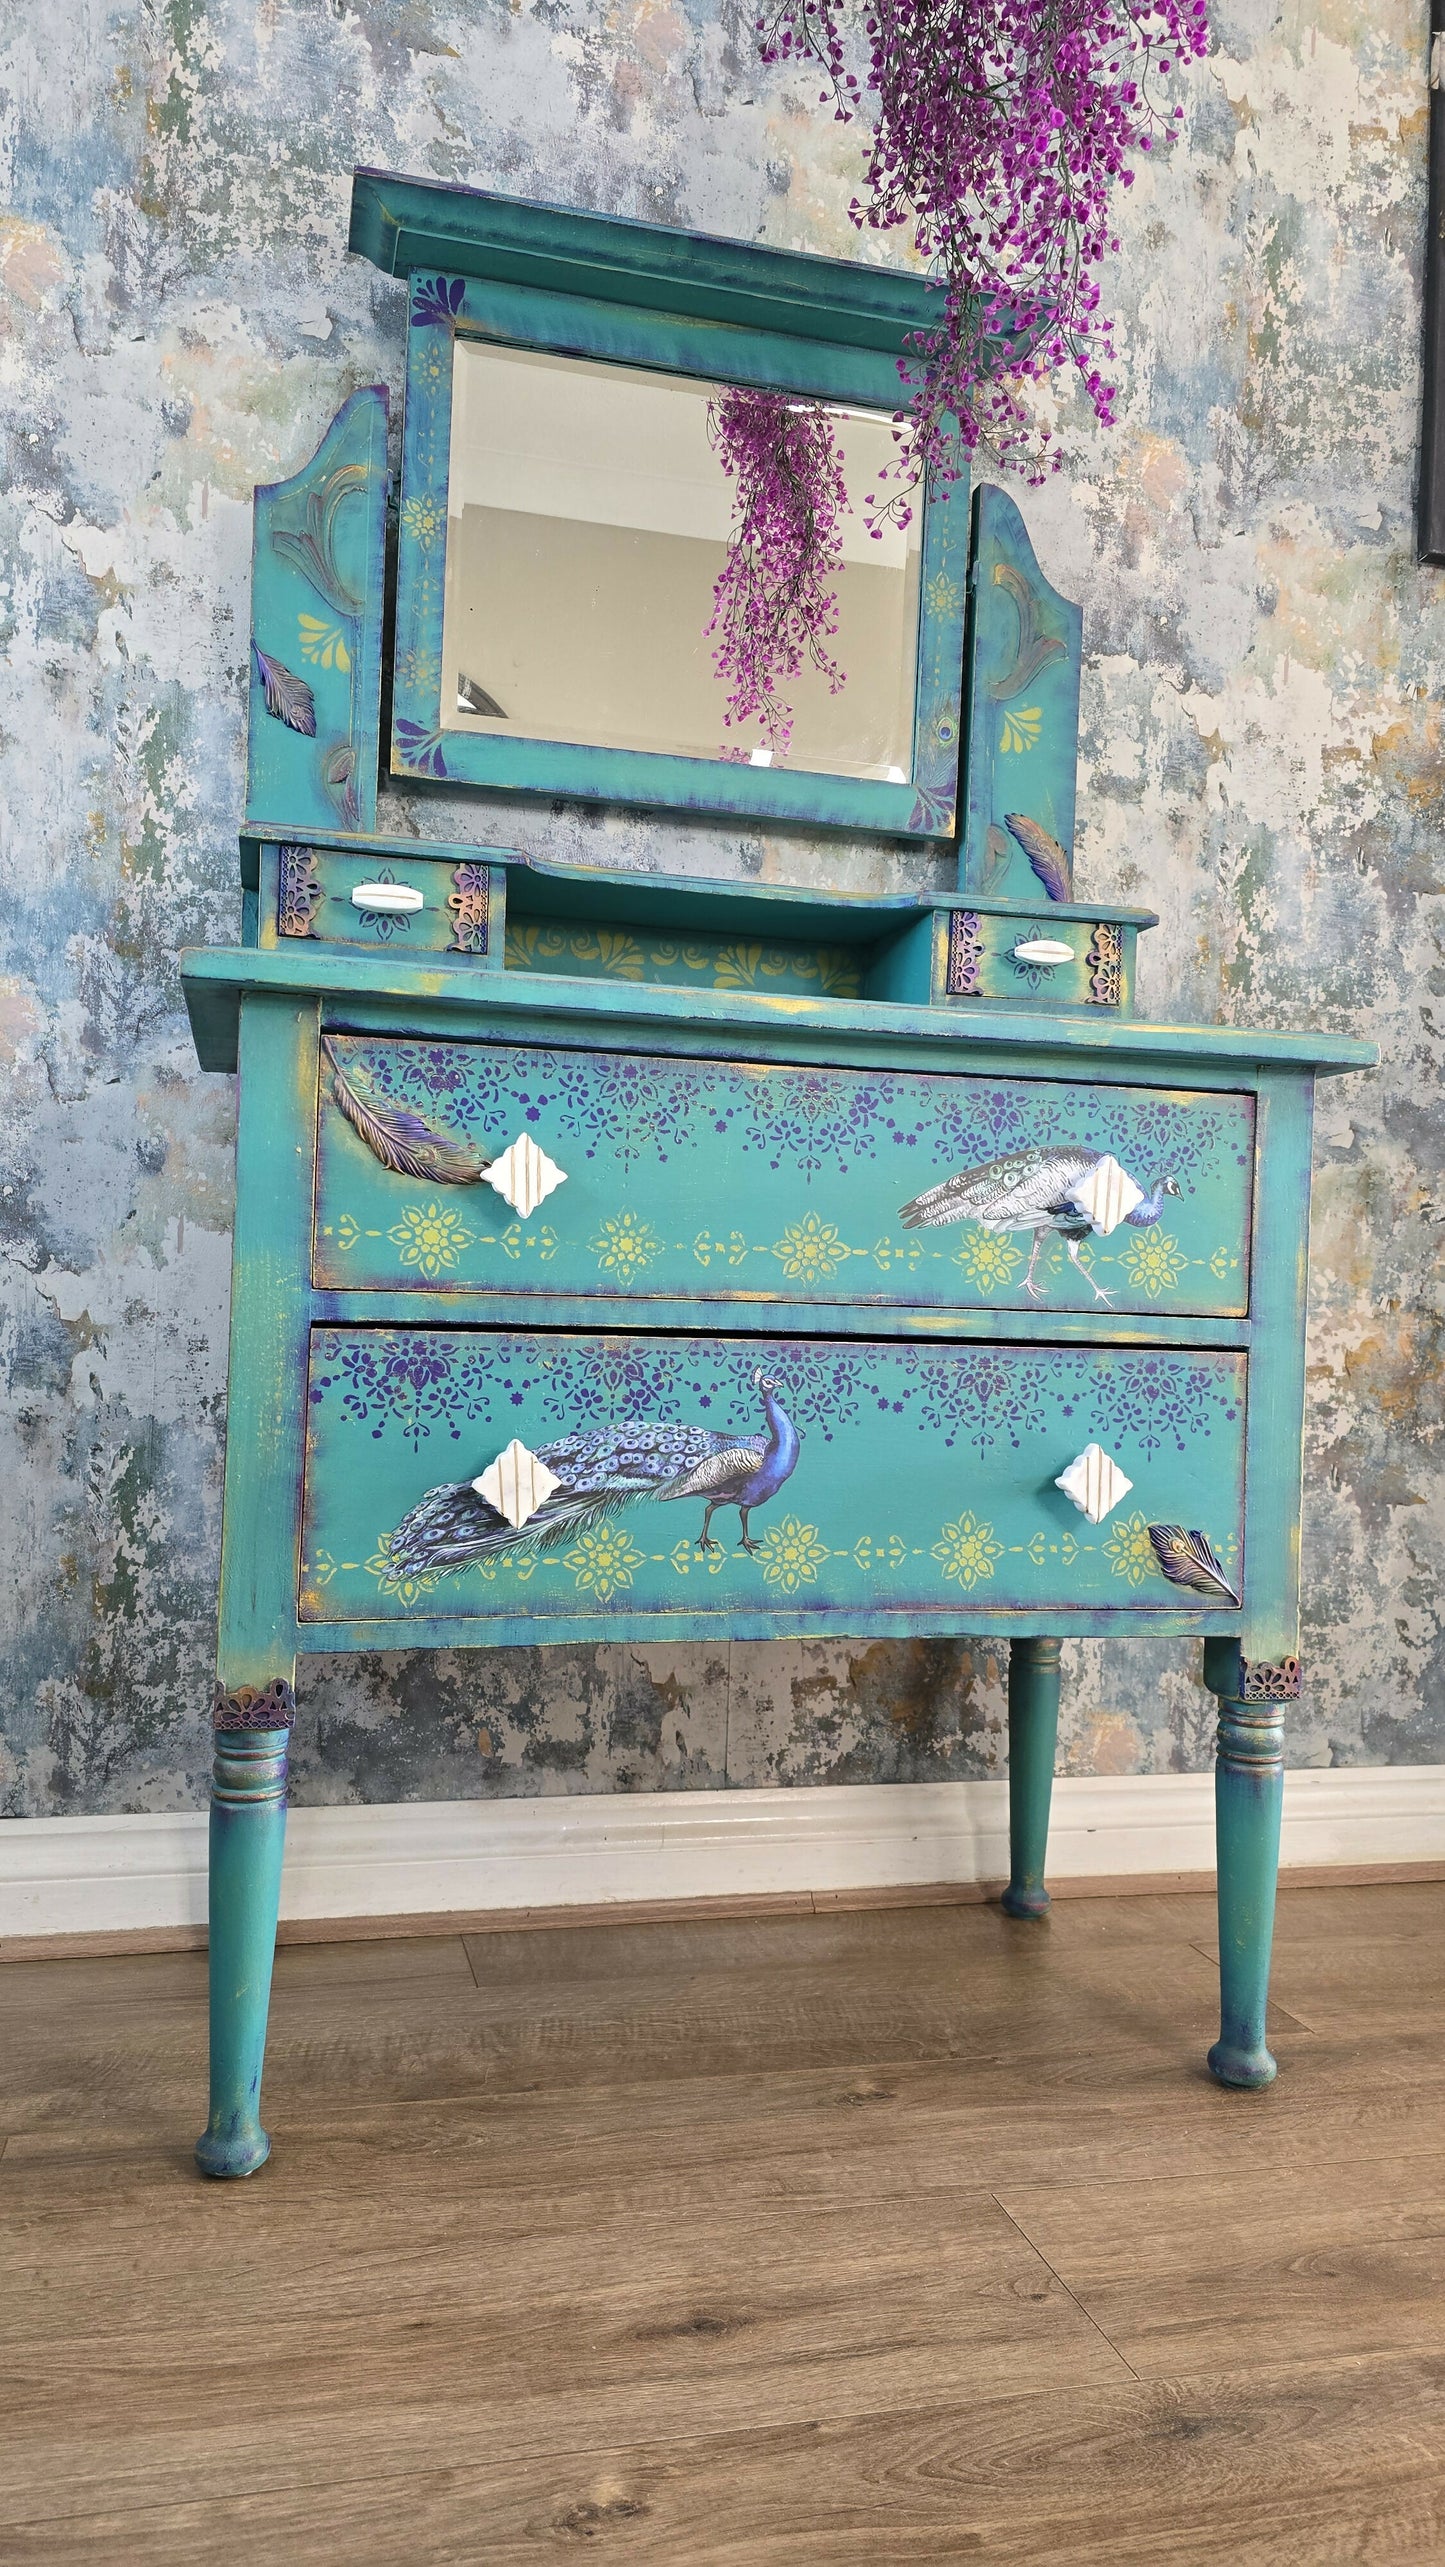 Upcycled peacock design dressing table